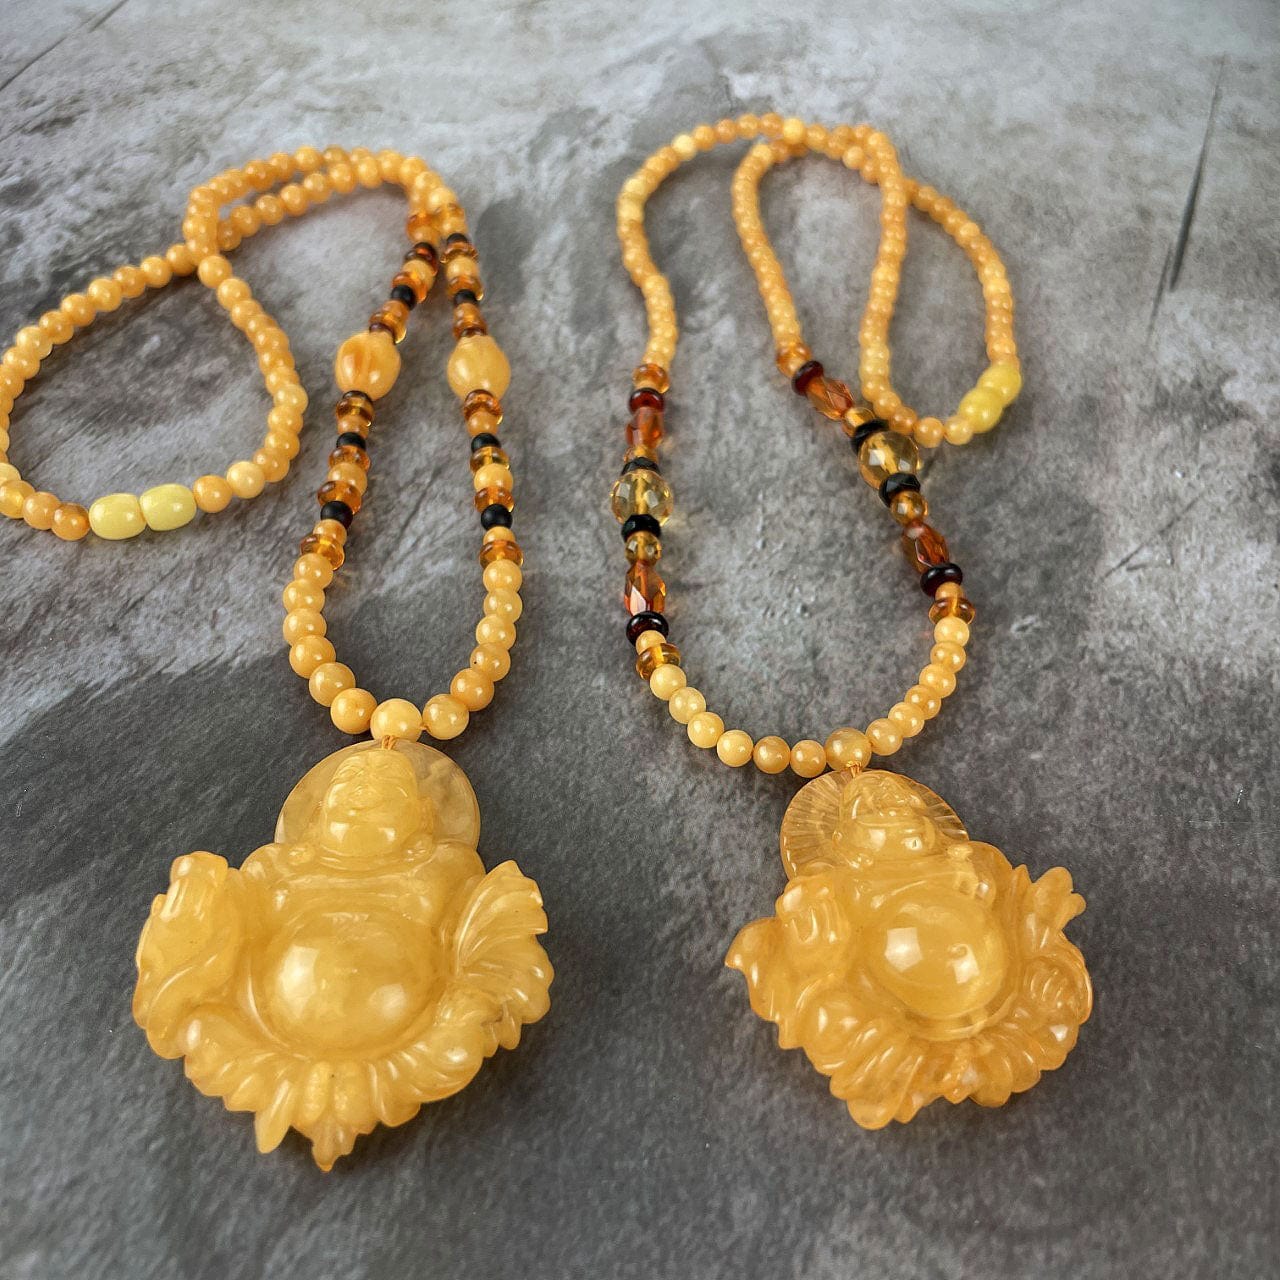 Amber Beaded Necklaces with Carved Buddha Pendants side by side at an agle to show details of the pendants